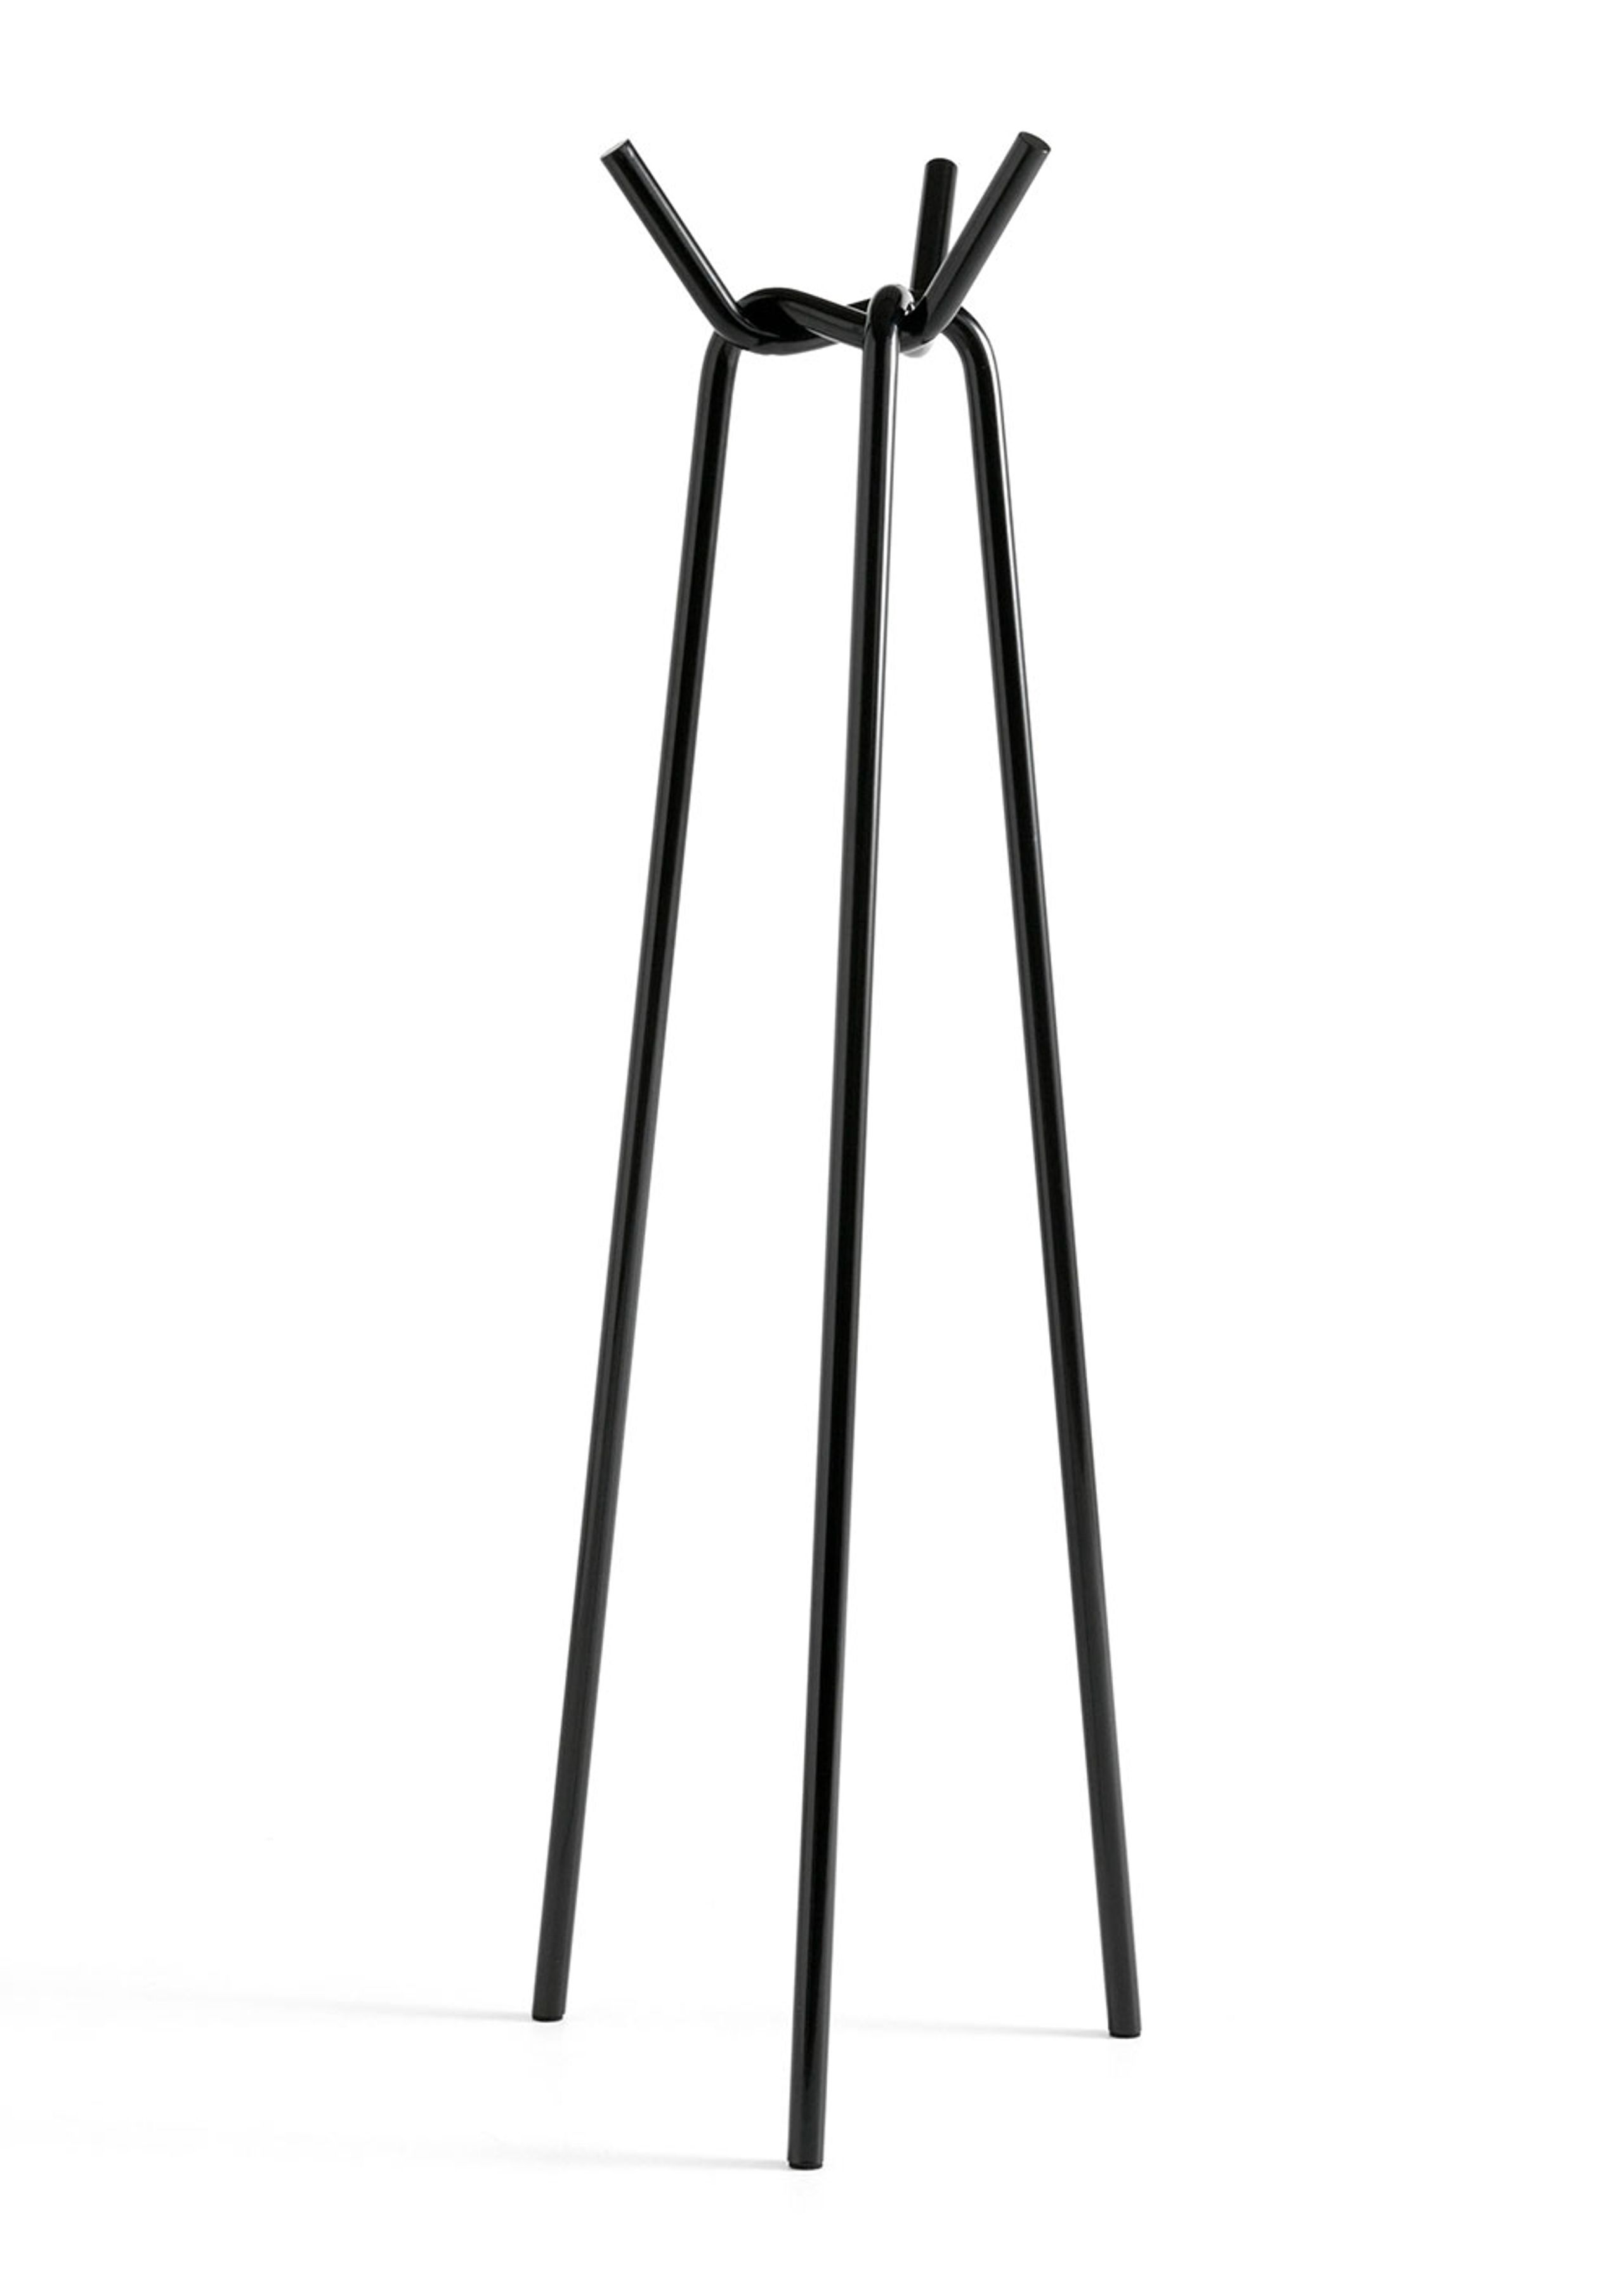 HAY - Knit - Coat Stand - Black